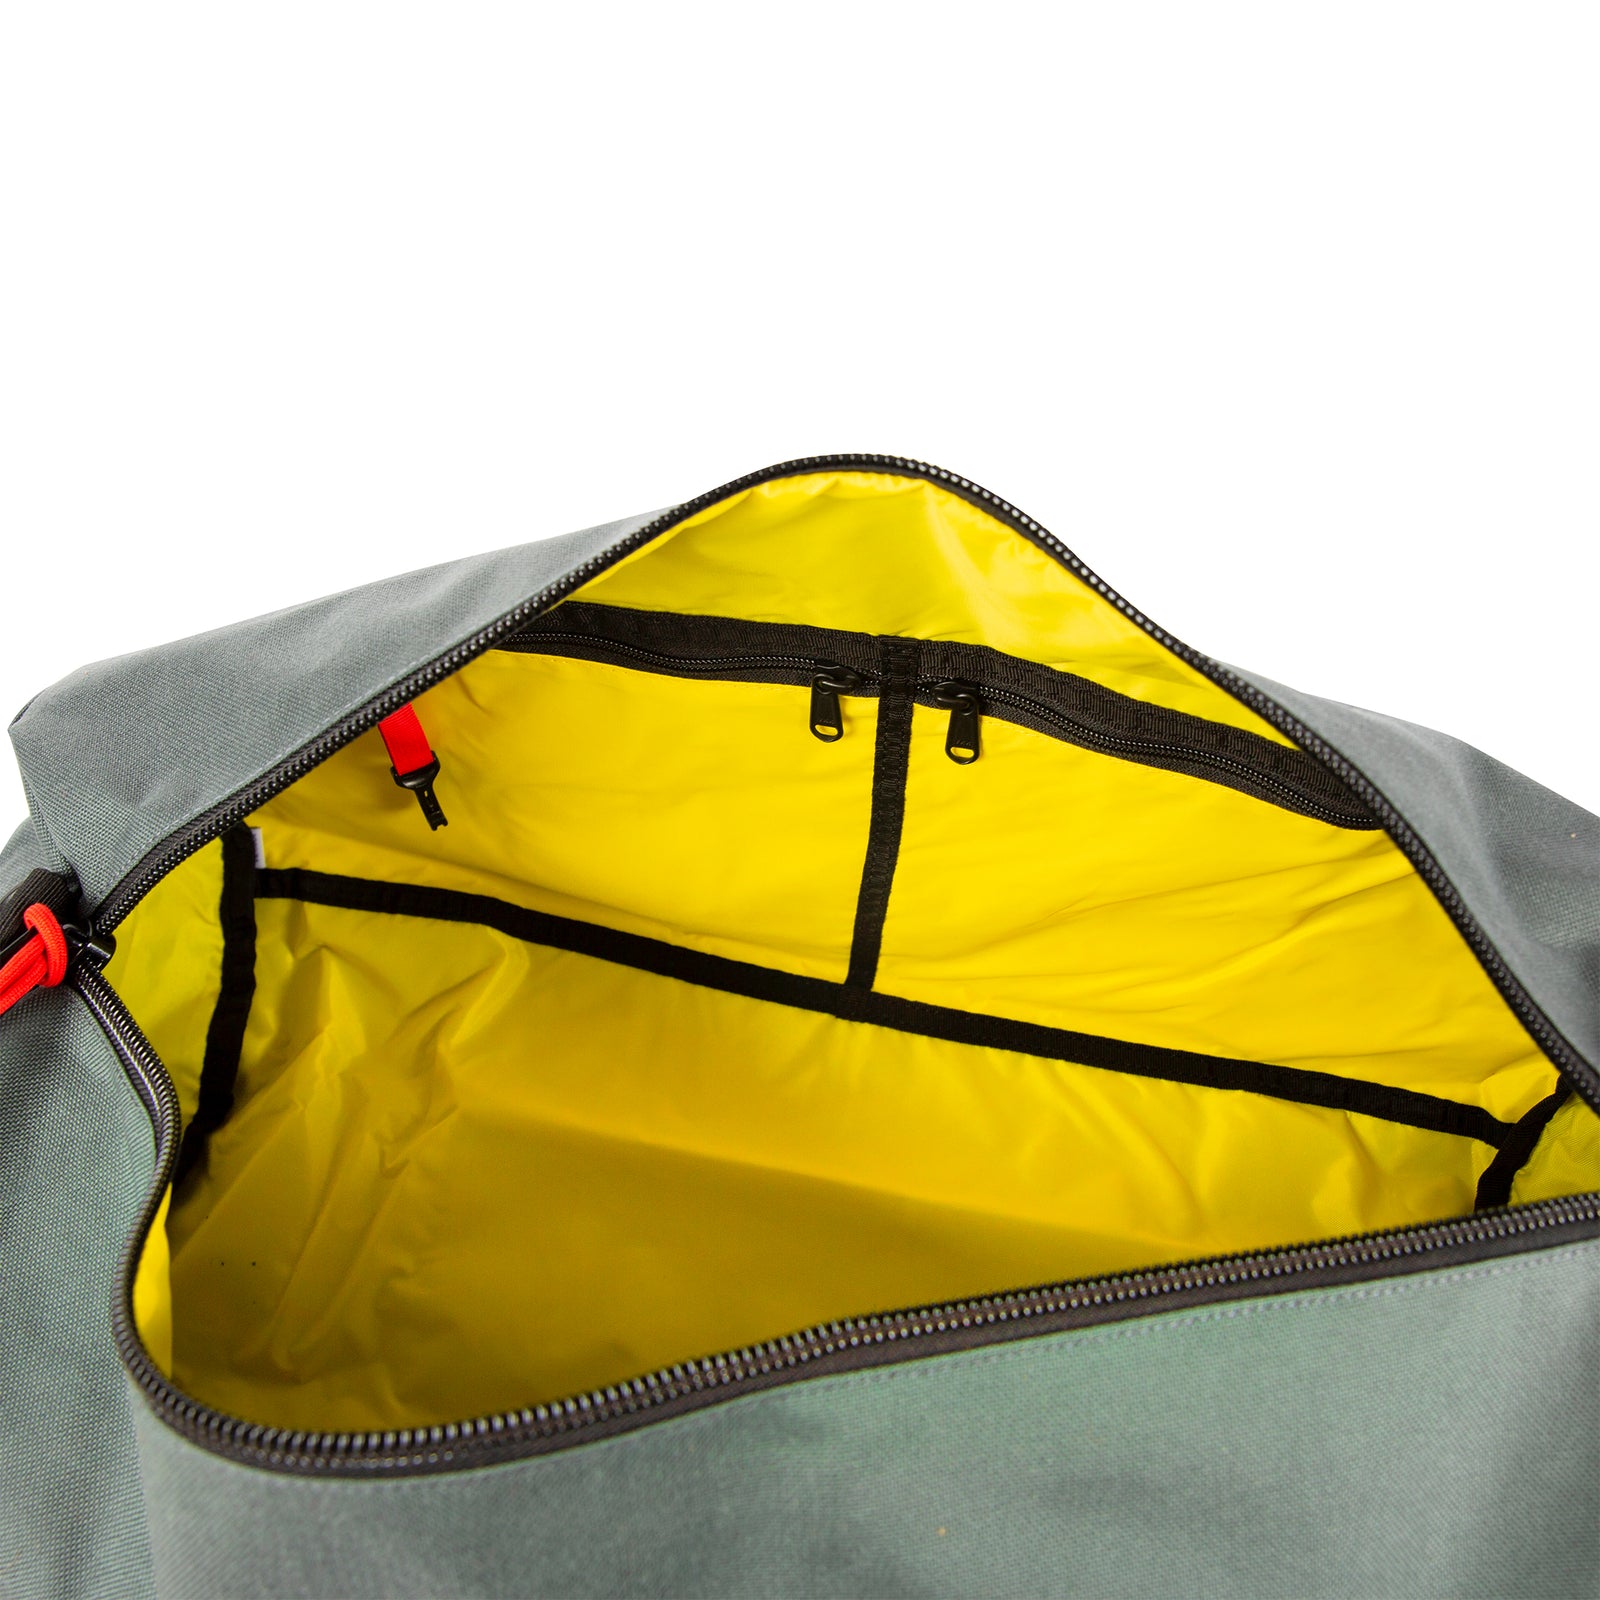 General shot of interior detail shot of Topo Designs Classic Duffel 20" in Charcoal gray showing yellow inside lining, internal zipper pockets, and red key clip.